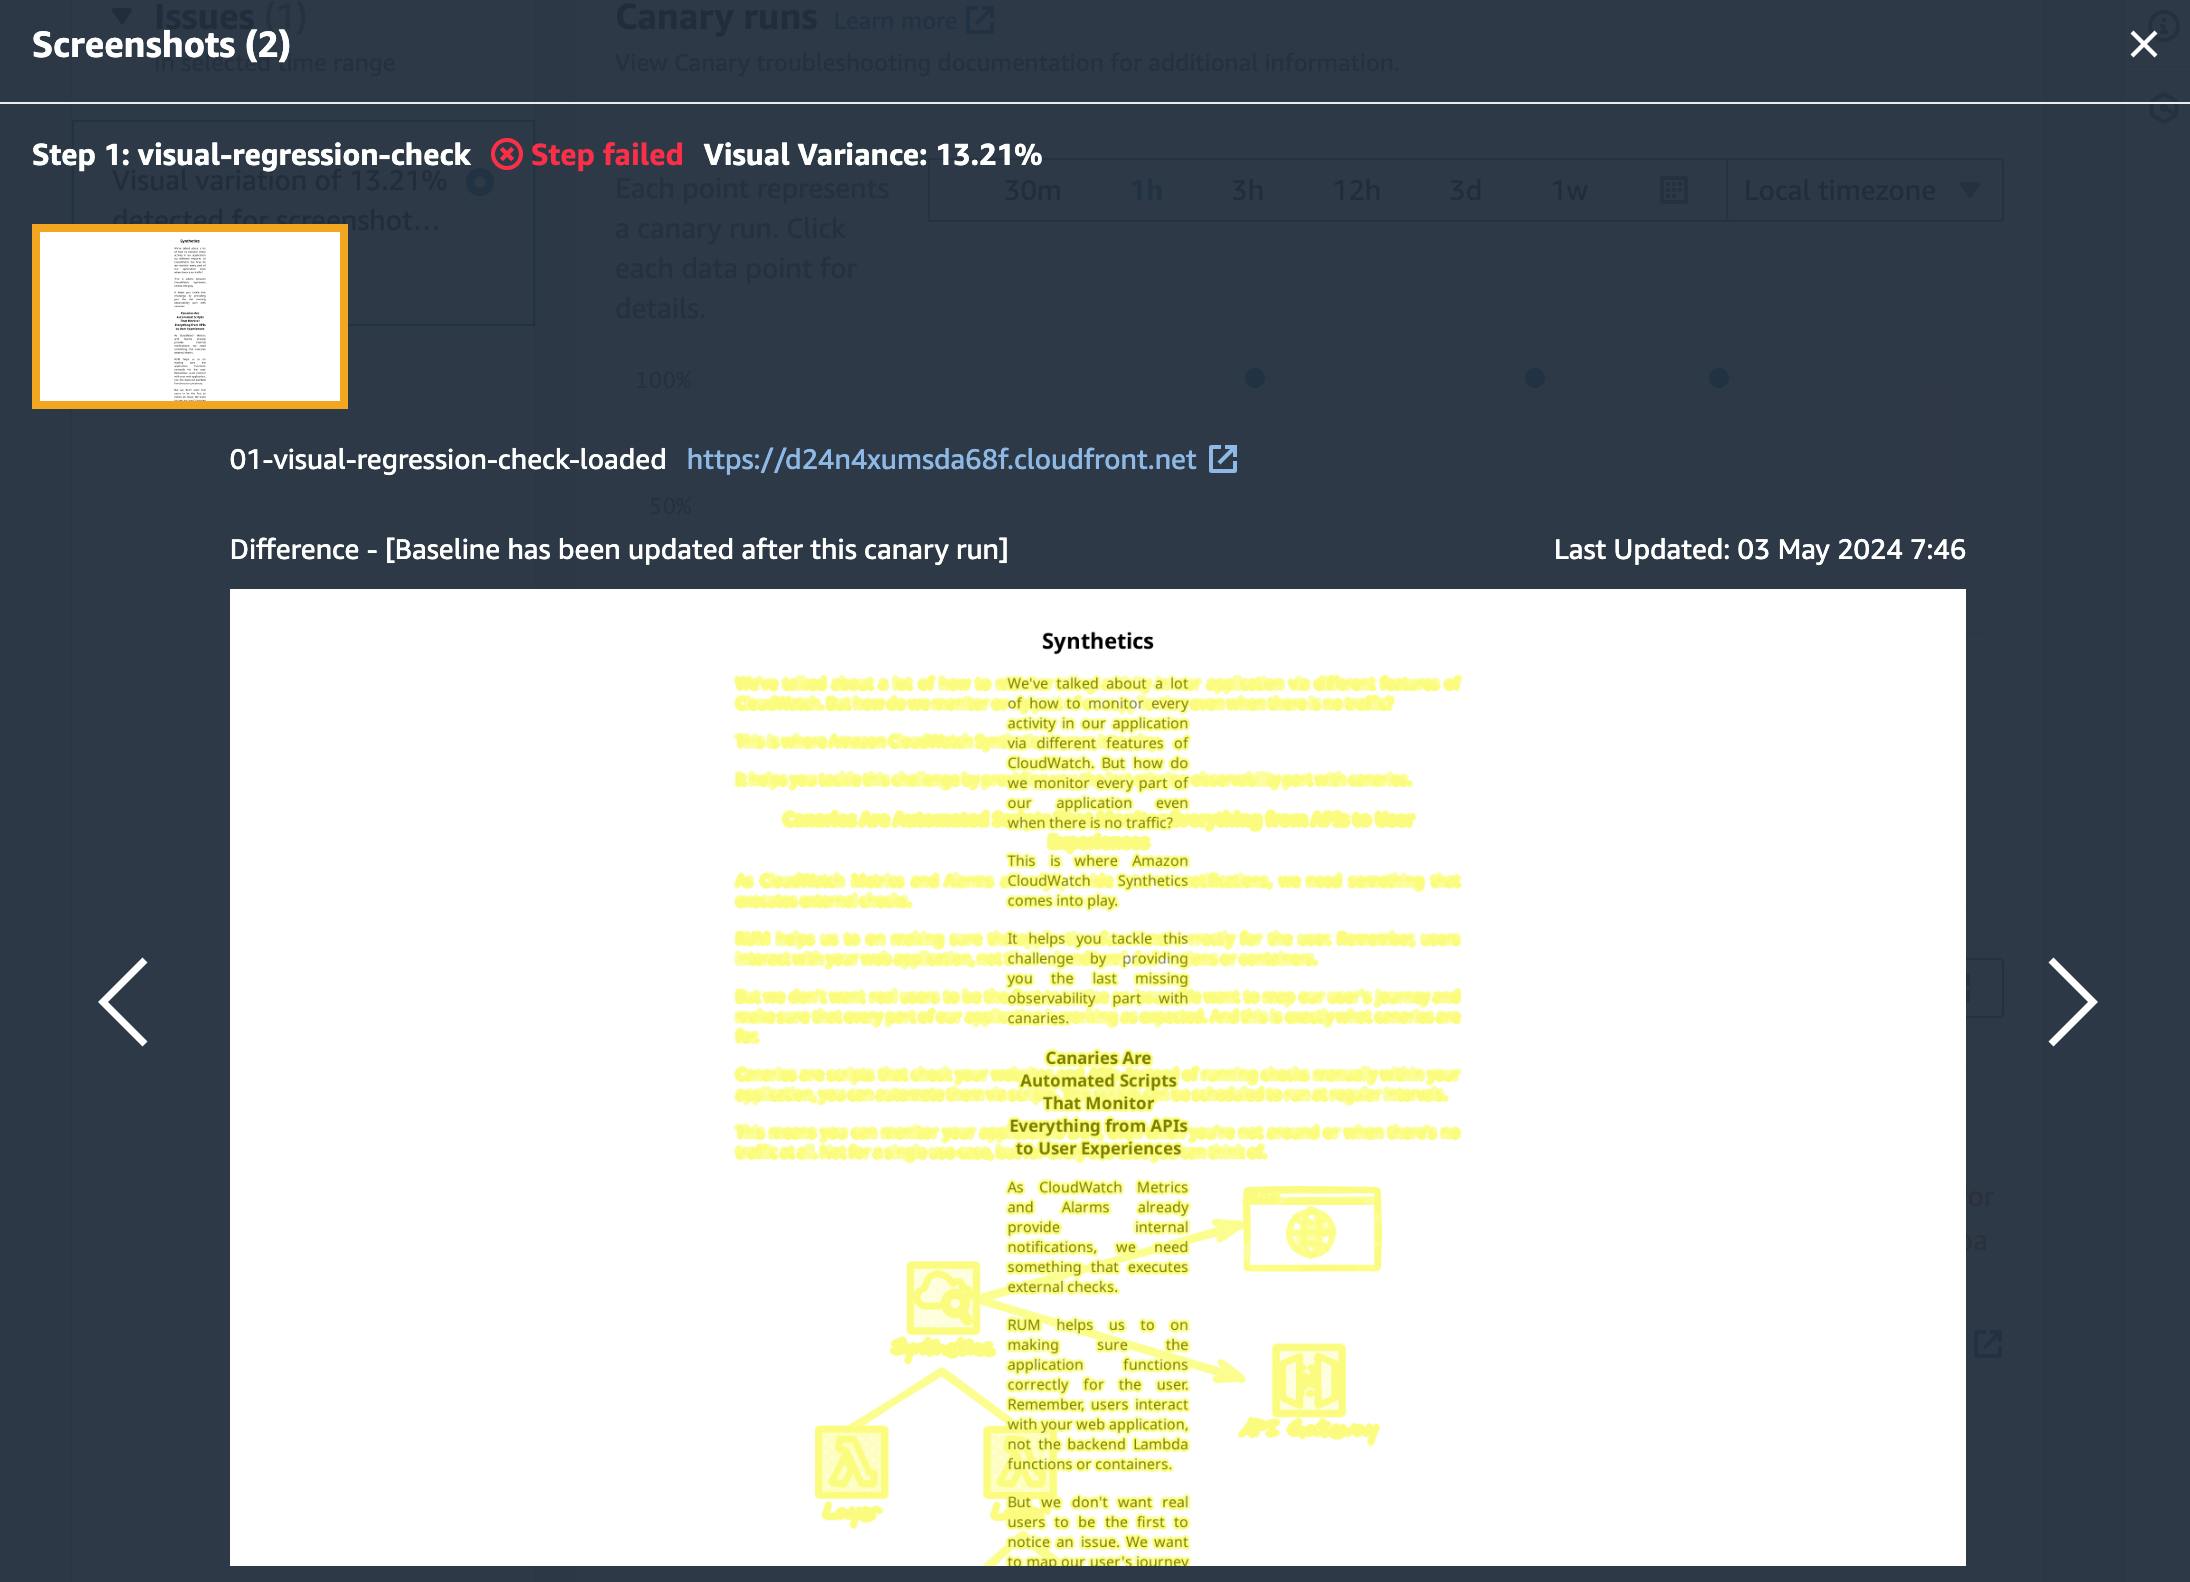 A screenshot showing a user interface for a visual regression check tool, indicating a step failure due to a 13.21% visual variance. The interface includes details about the test, links, and a timestamp of the last update.